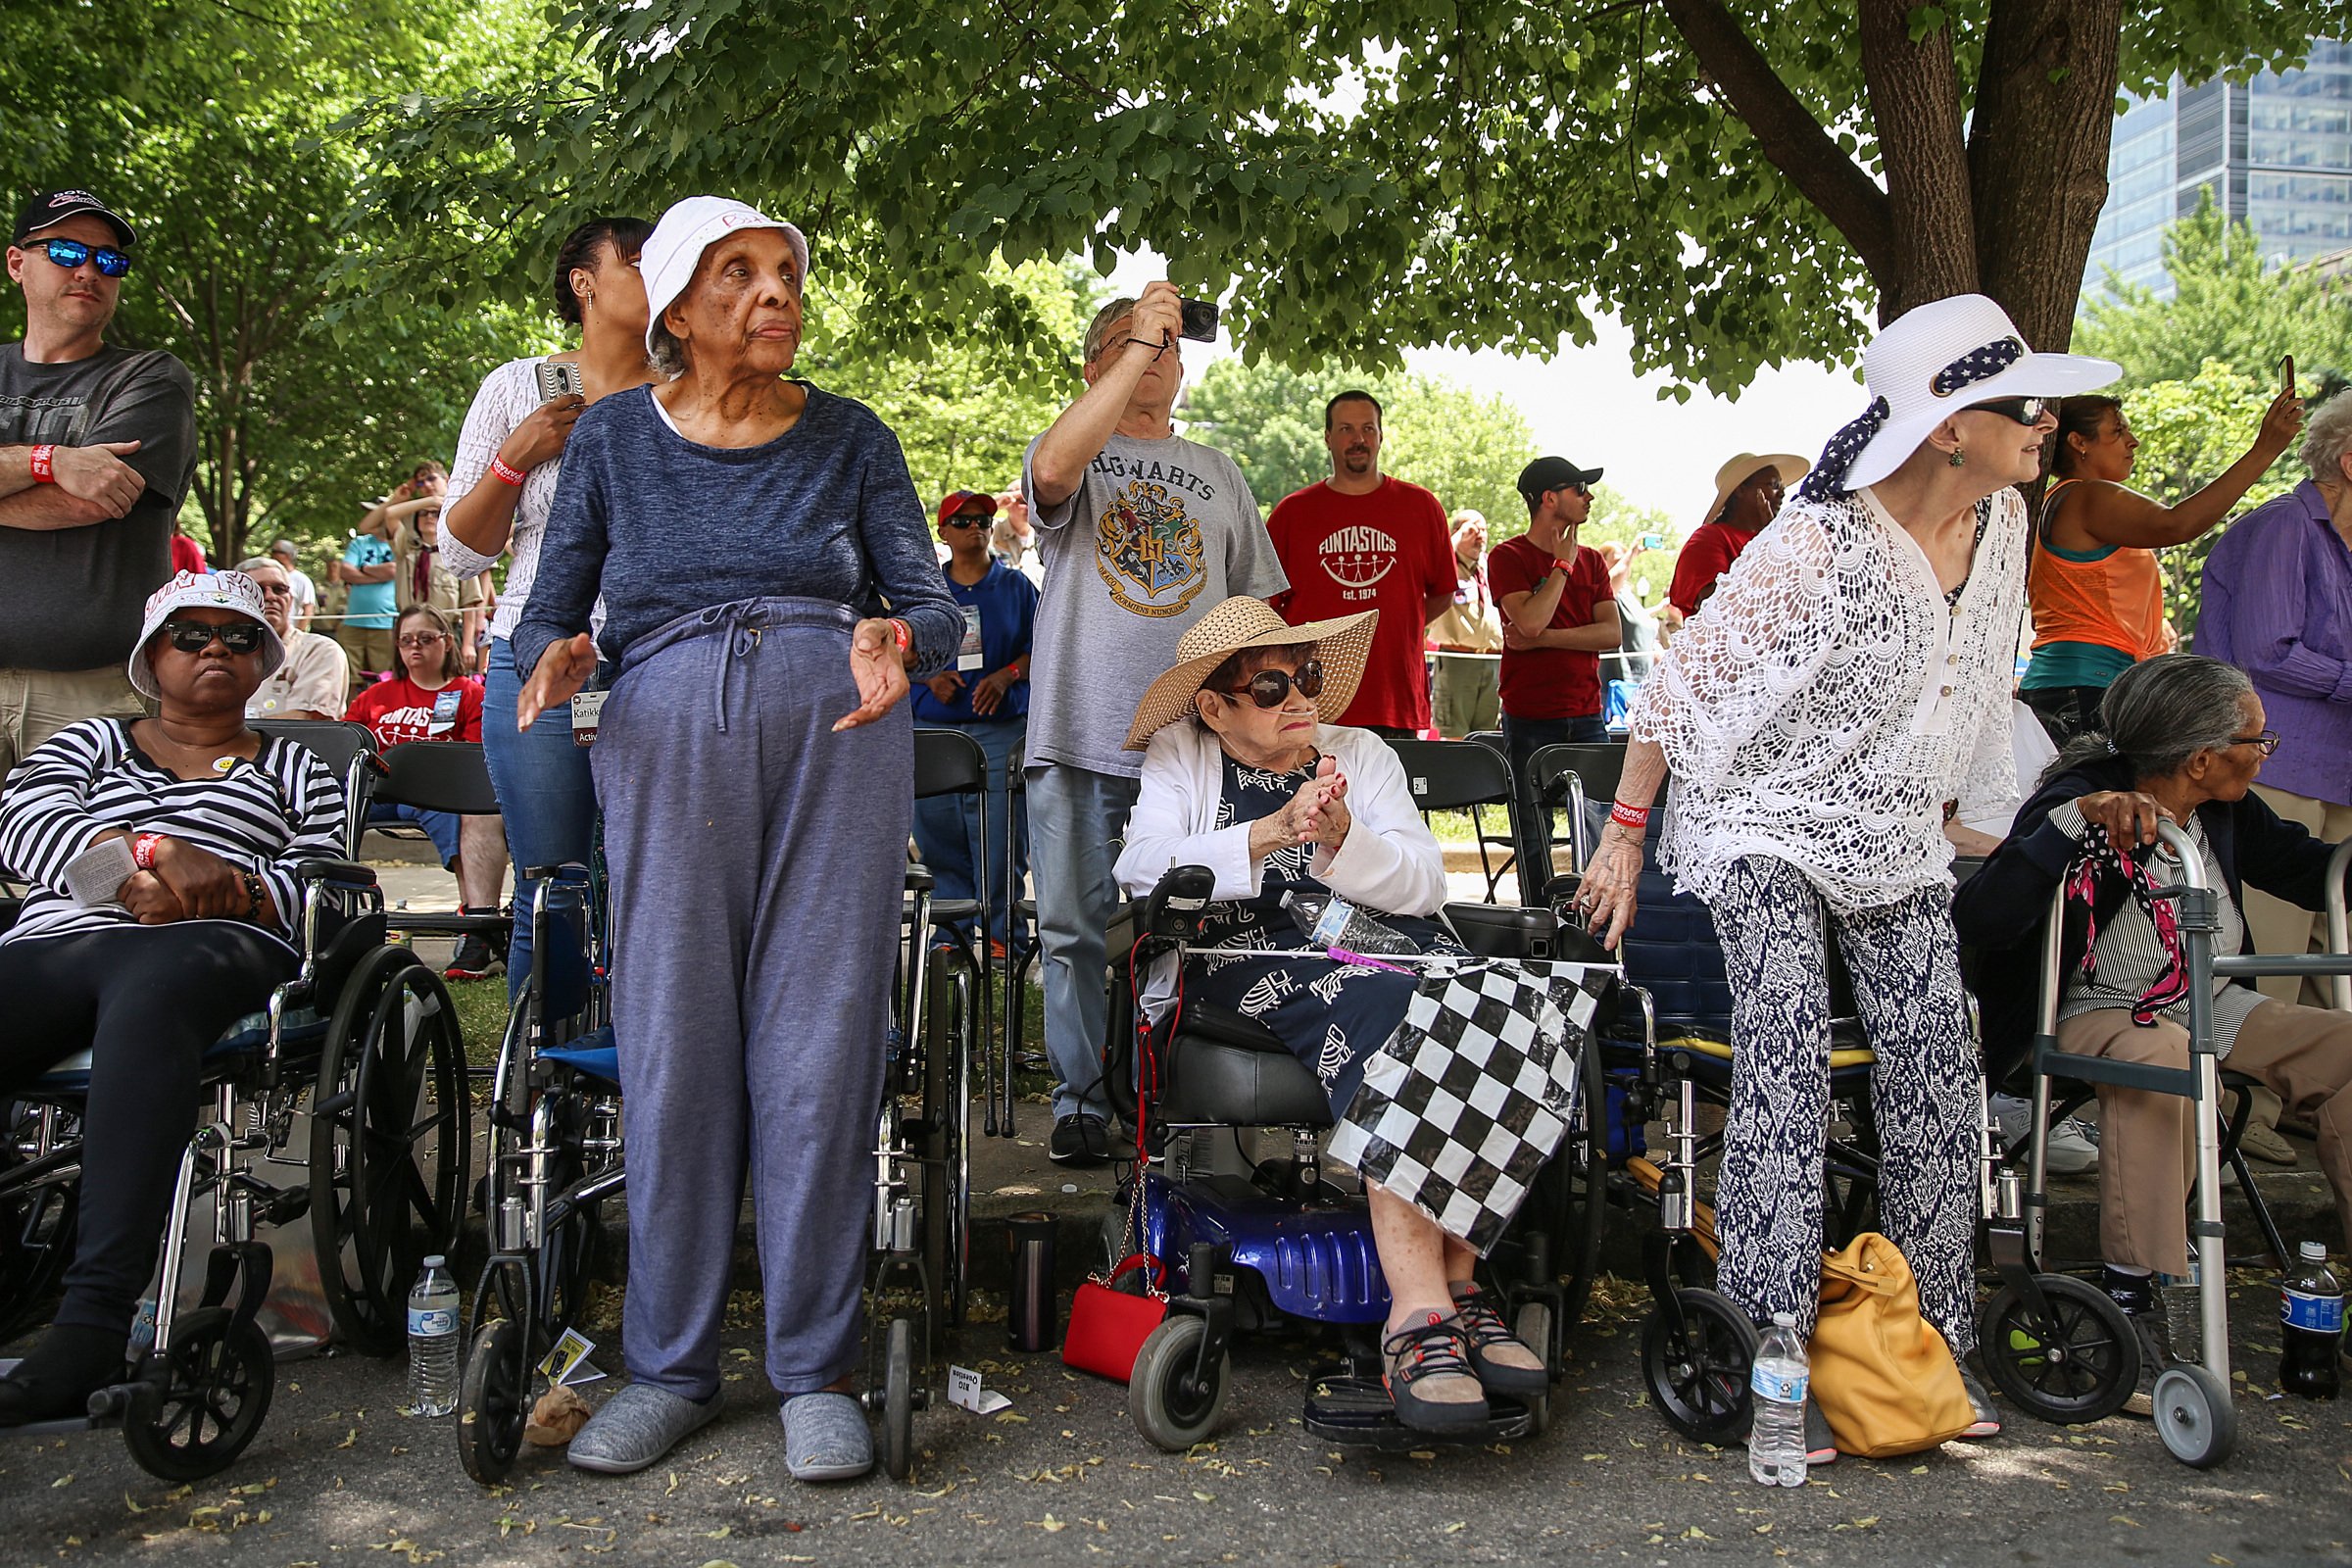  Elderly spectators watch as the 500 Festival Parade passes through downtown Indianapolis, Saturday, May 26, 2018. The mid-day parade takes place a day before the Indy 500 mile race.  